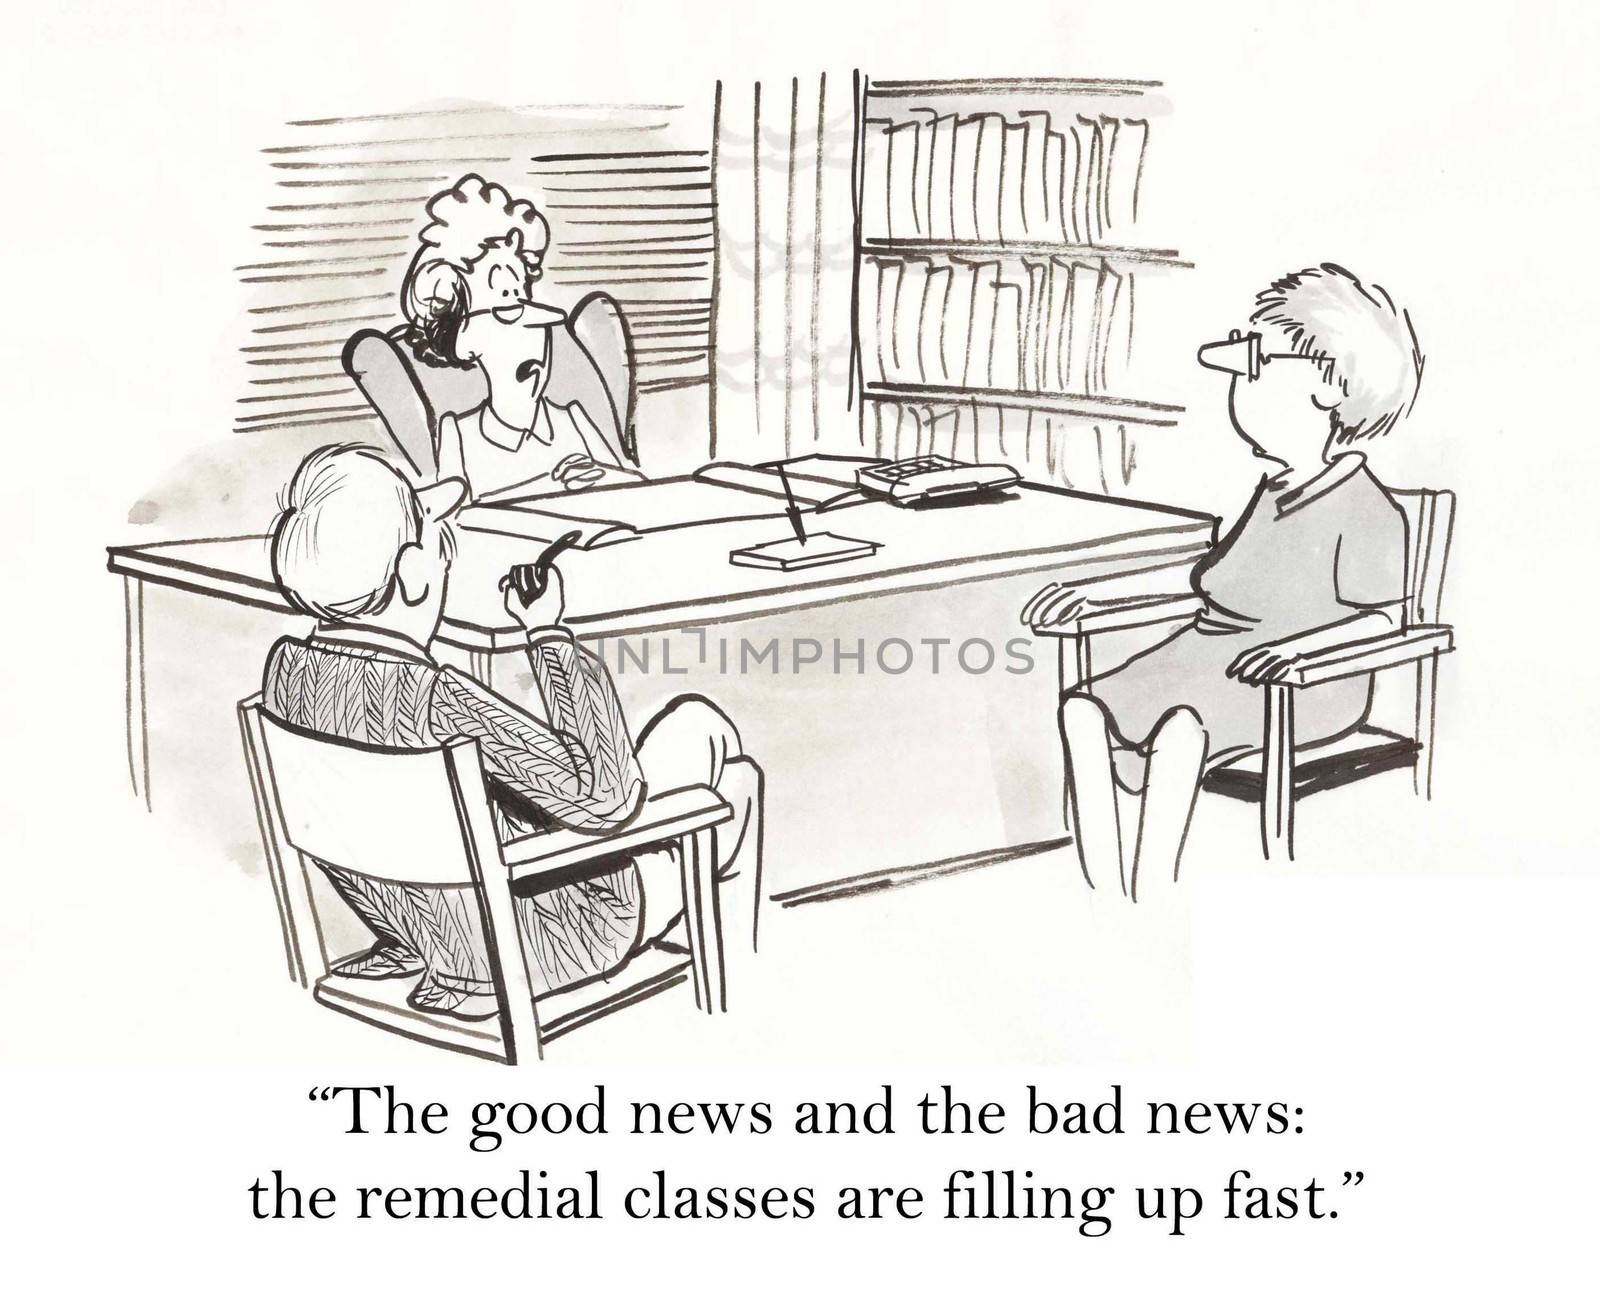 "The good news and the bad news, the remedial classes are filling up fast."